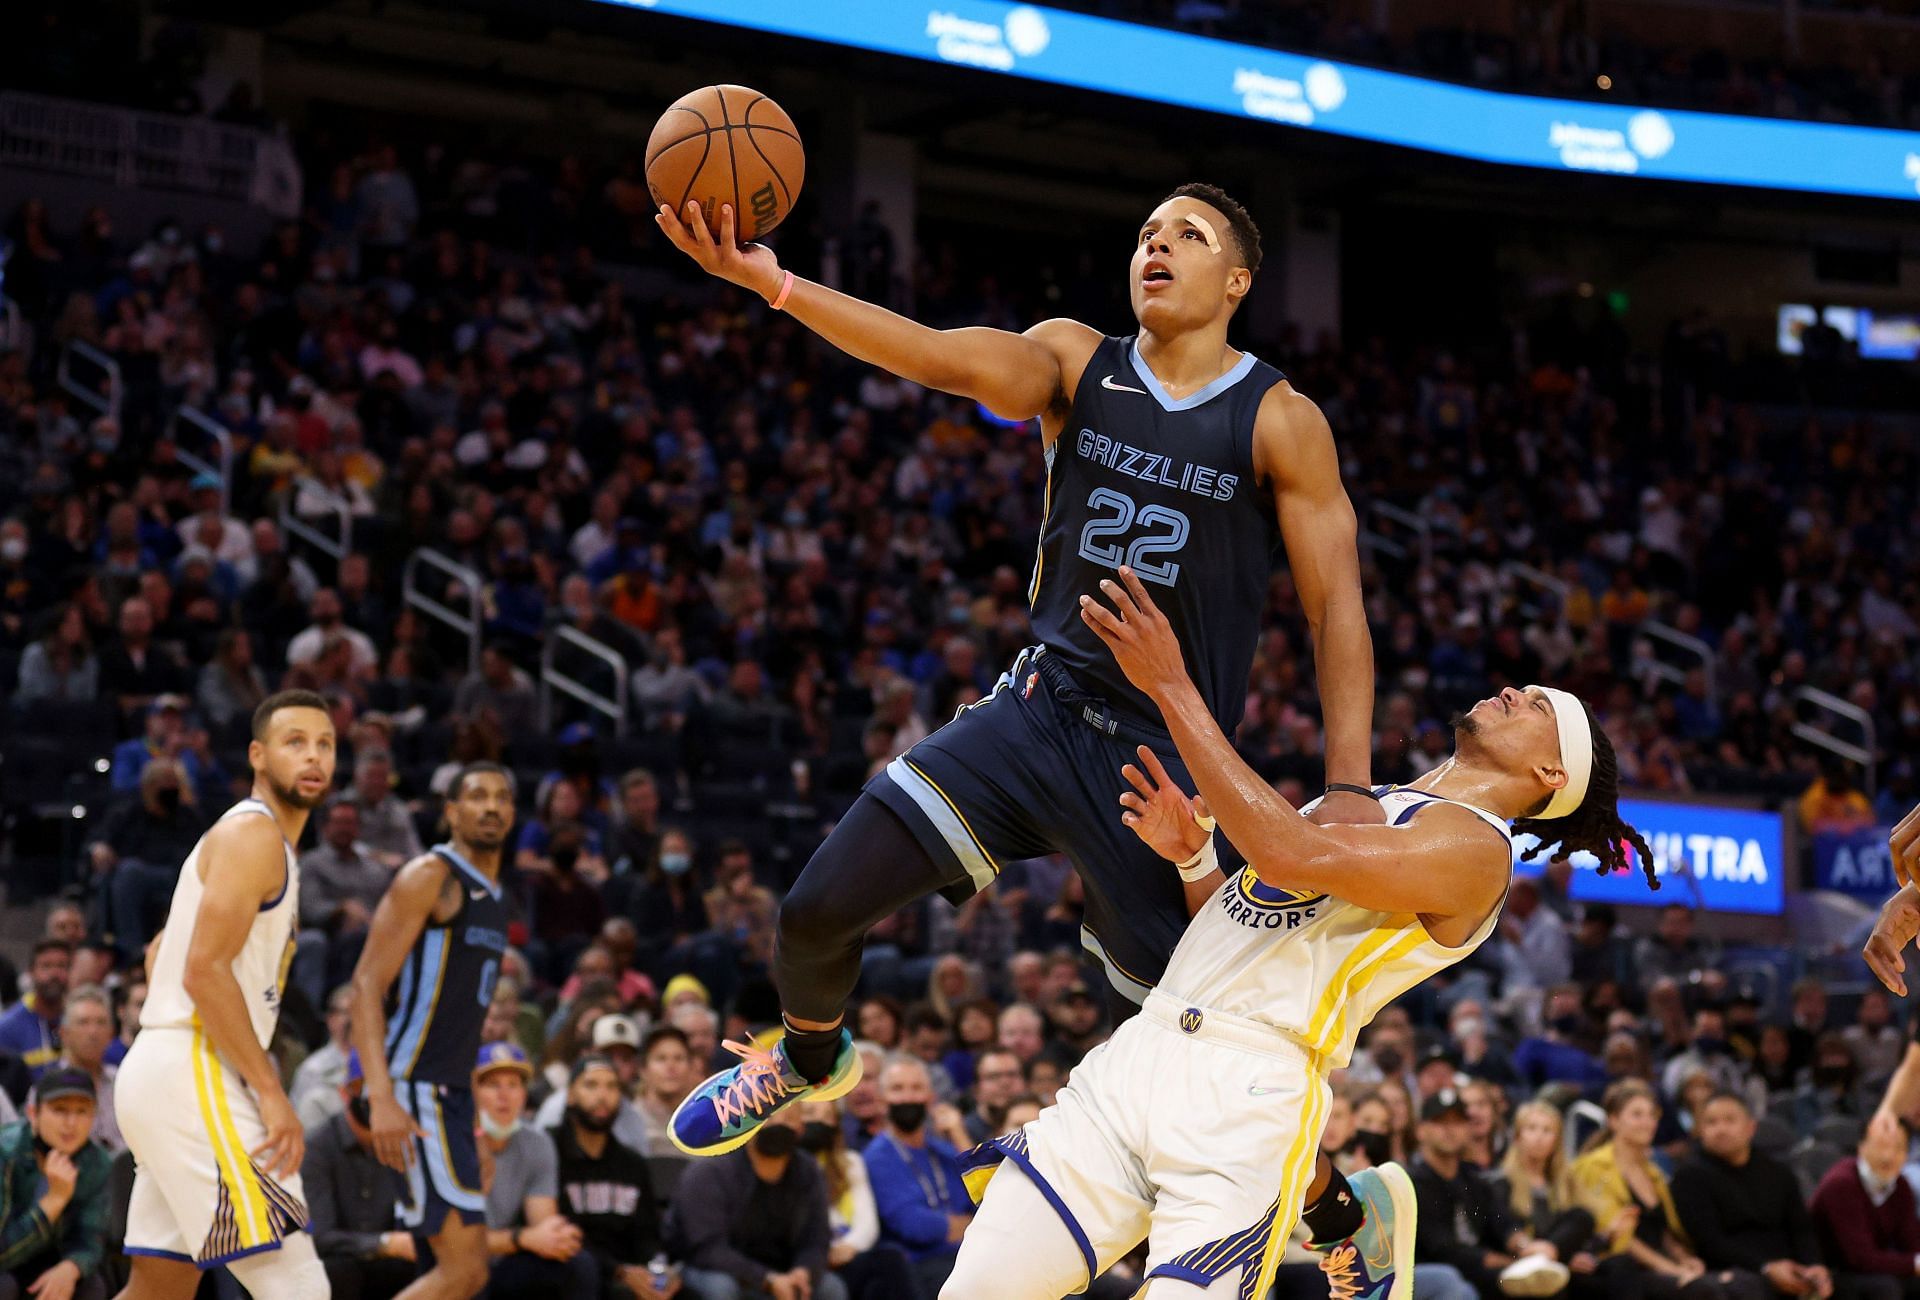 Desmond Bane (#22) of the Memphis Grizzlies goes up for a shot on Damion Lee (#1) of the Golden State Warriors